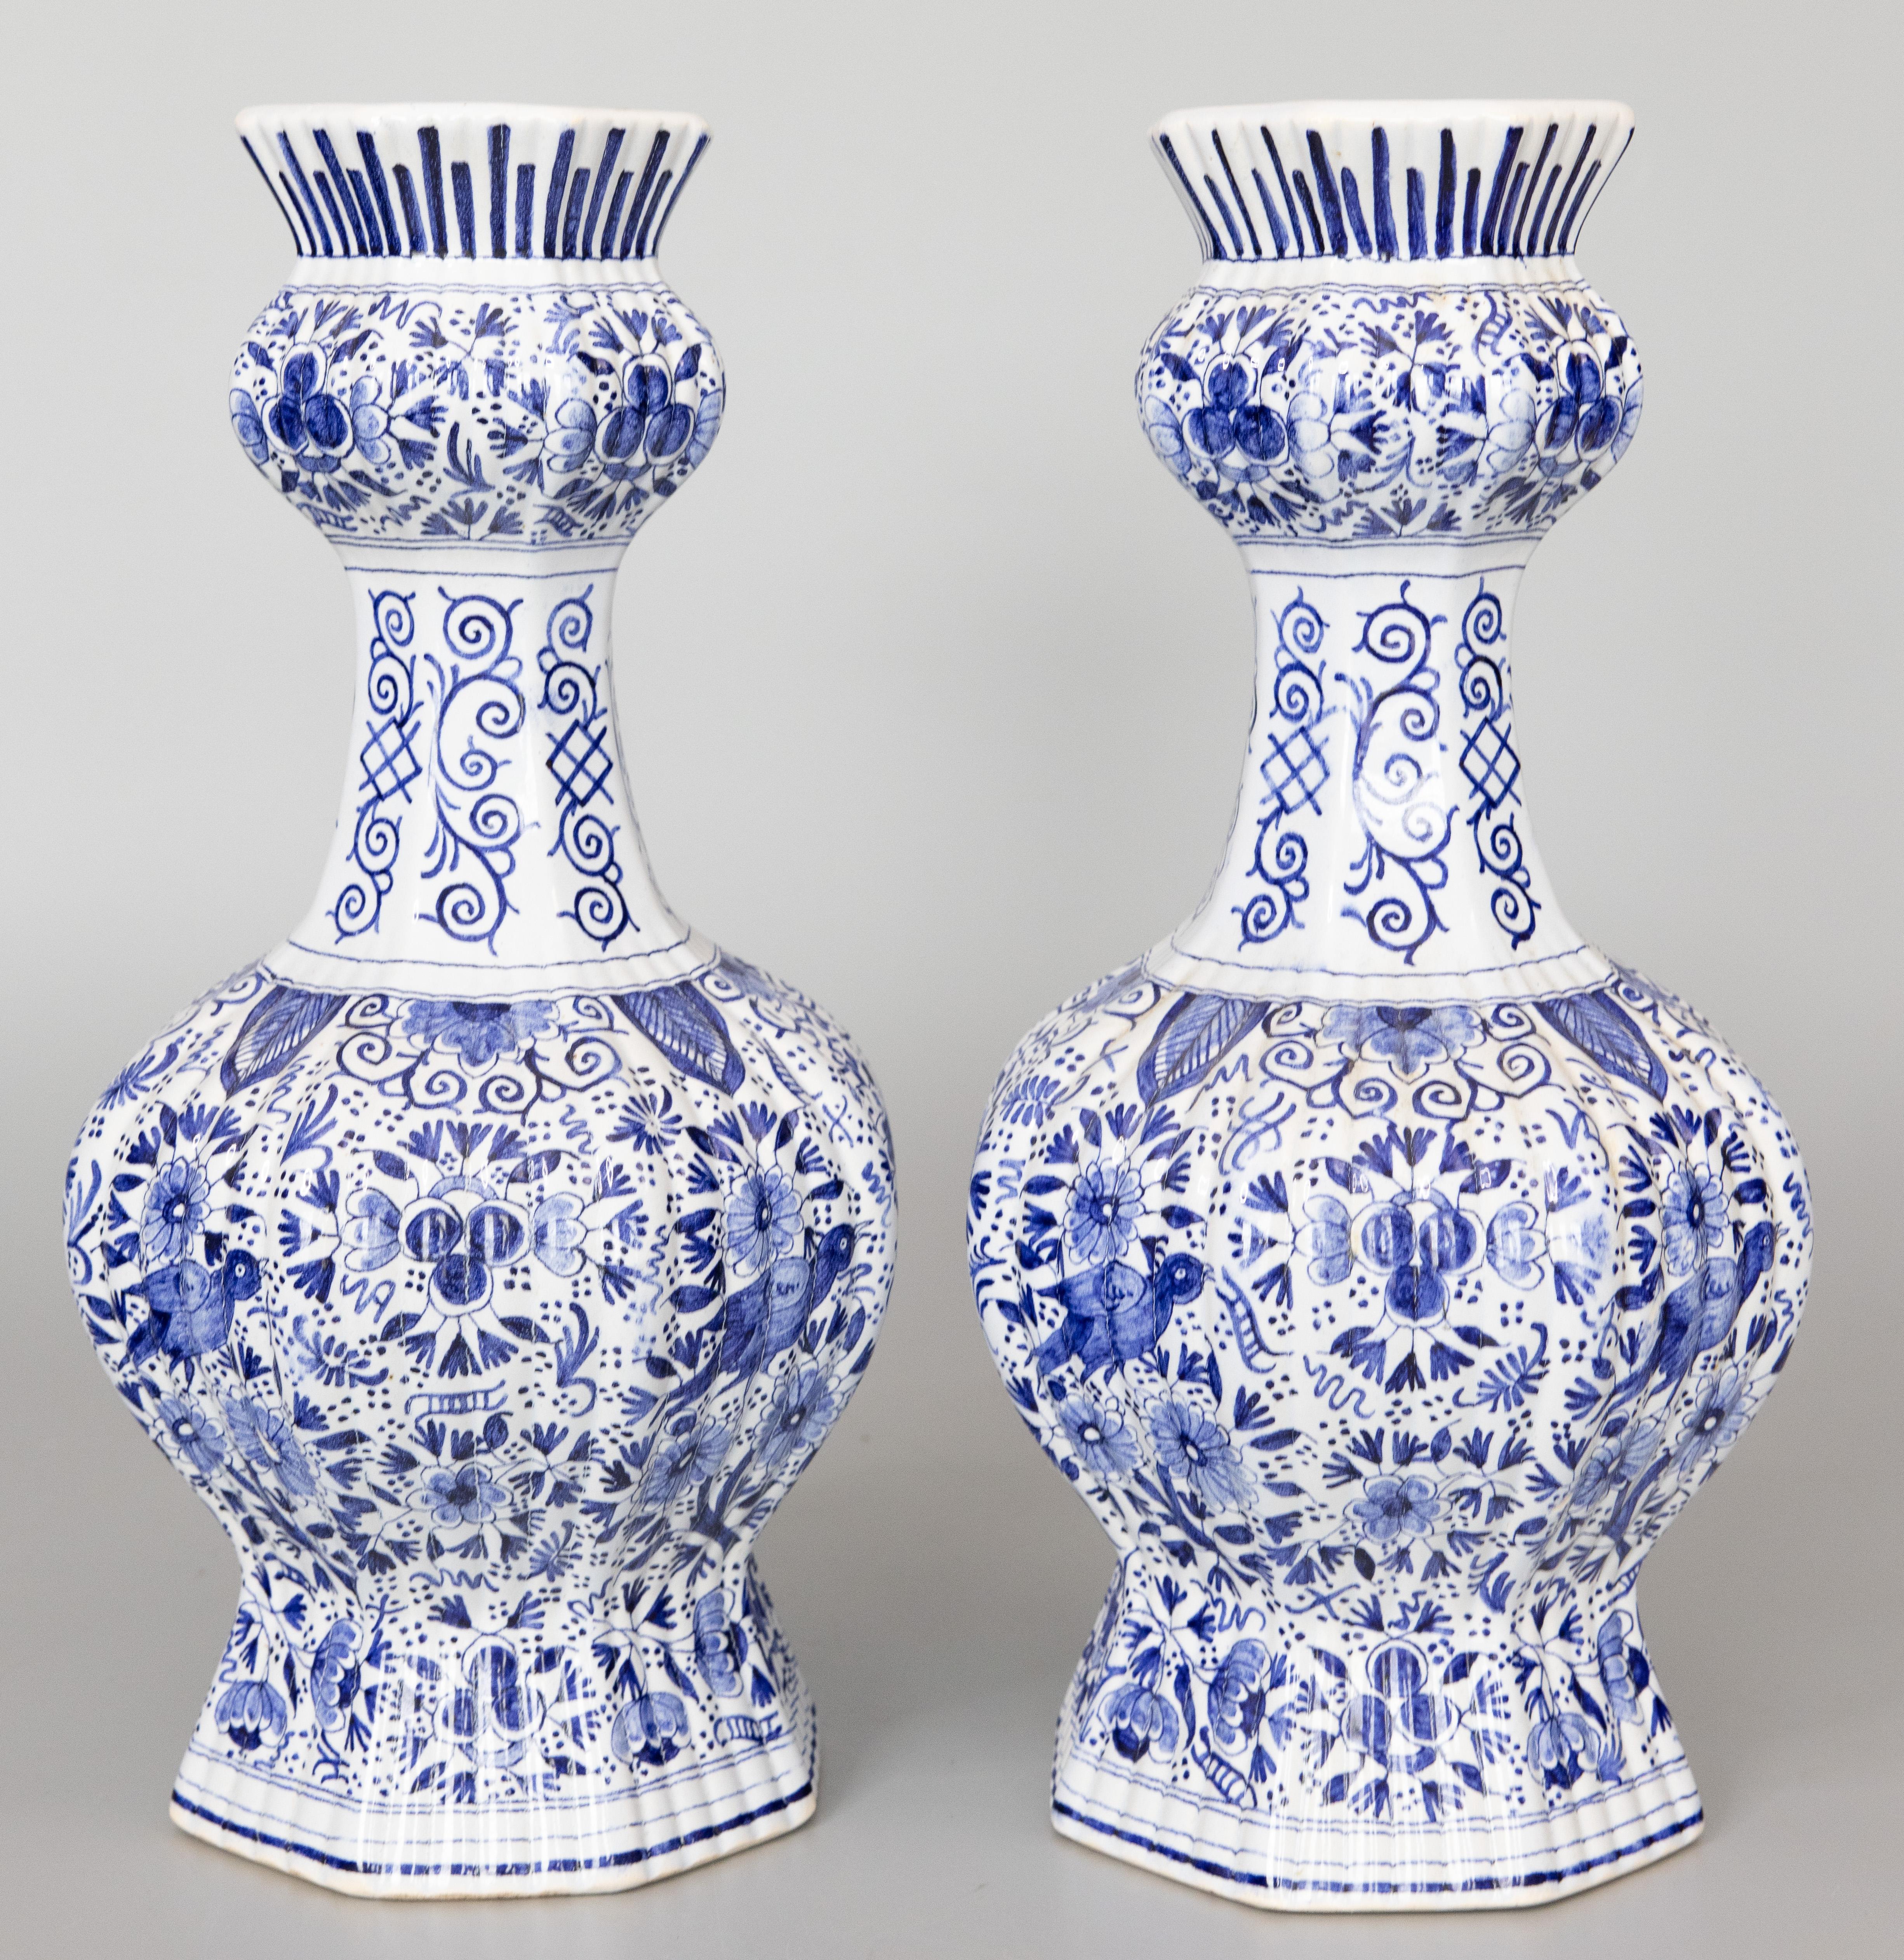 A superb large pair of antique 19th-century Dutch Delft faience knobble vases, circa 1800. Maker's mark on reverse. These gorgeous vases have a lovely ribbed body with fine hand painted birds, flowers, leaves, and ornate scrolls in brilliant blue